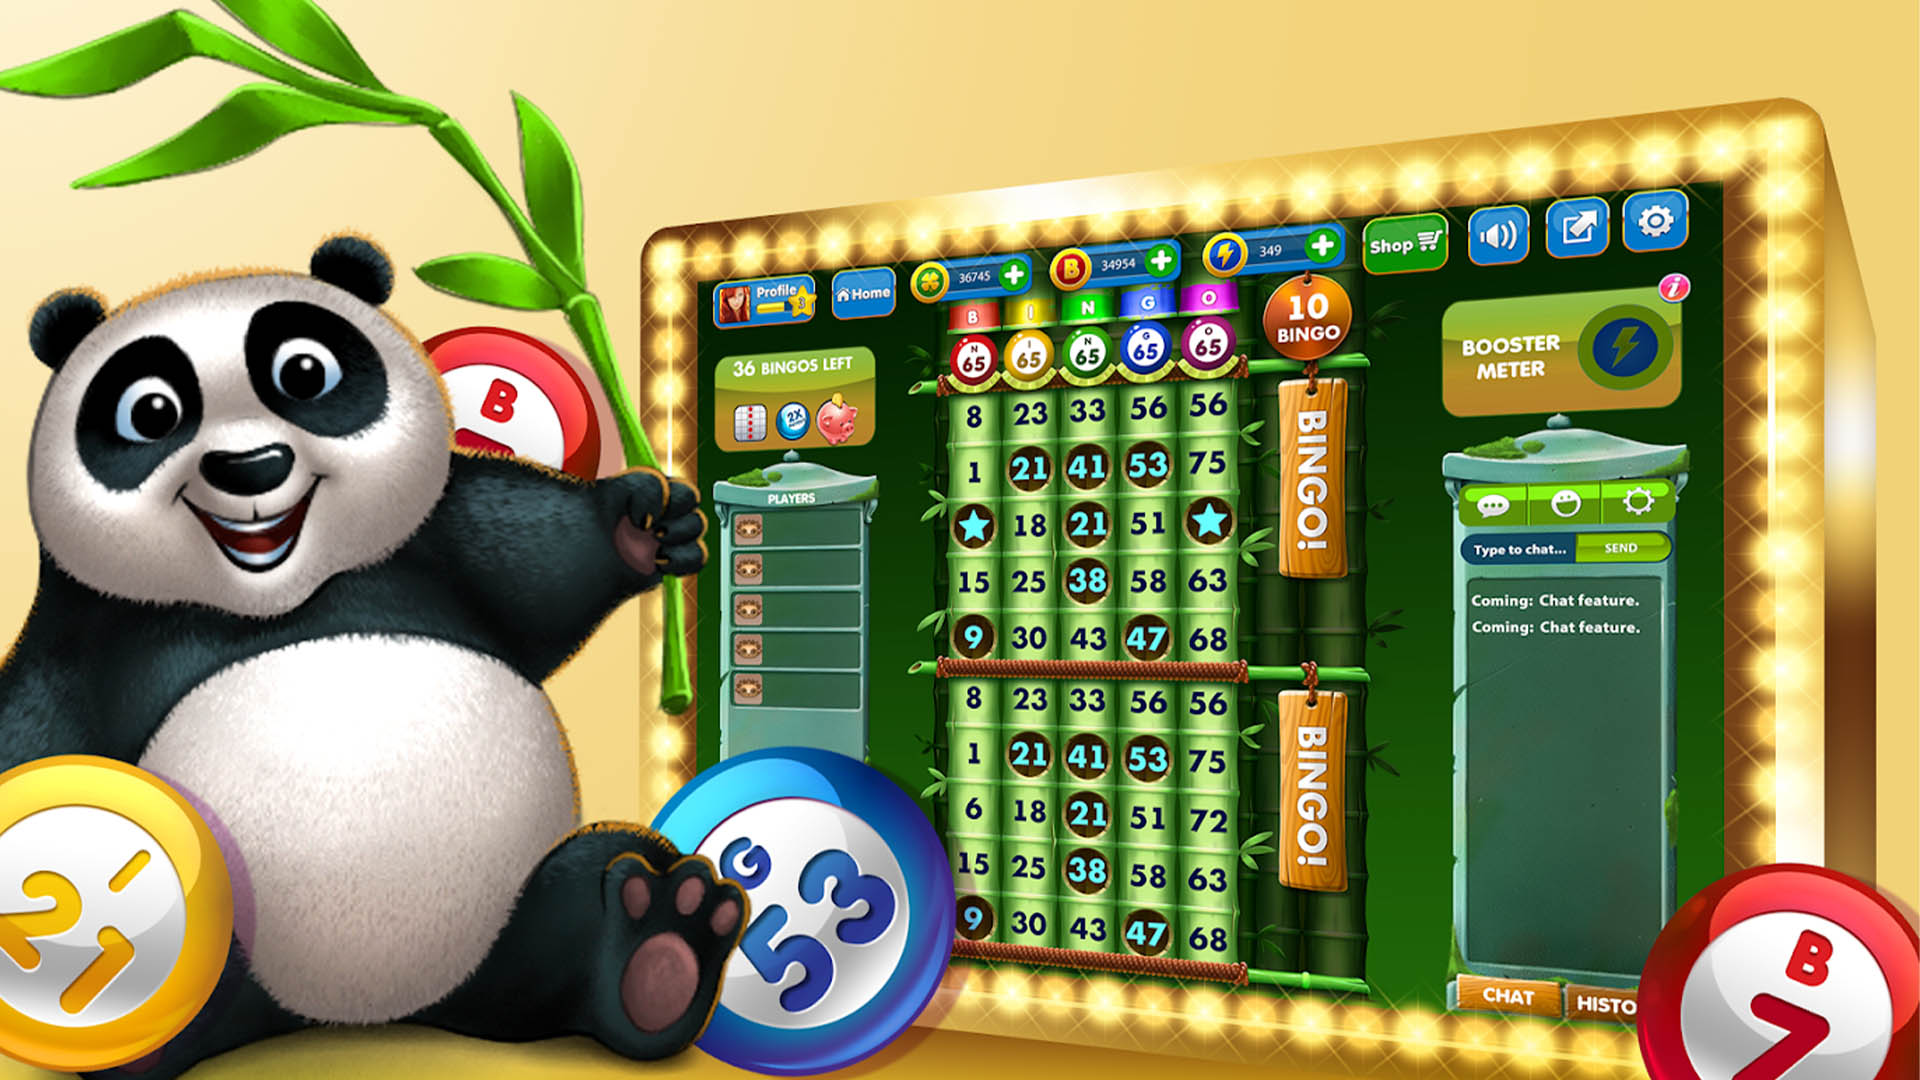 10 best Bingo games for Android - Android Authority